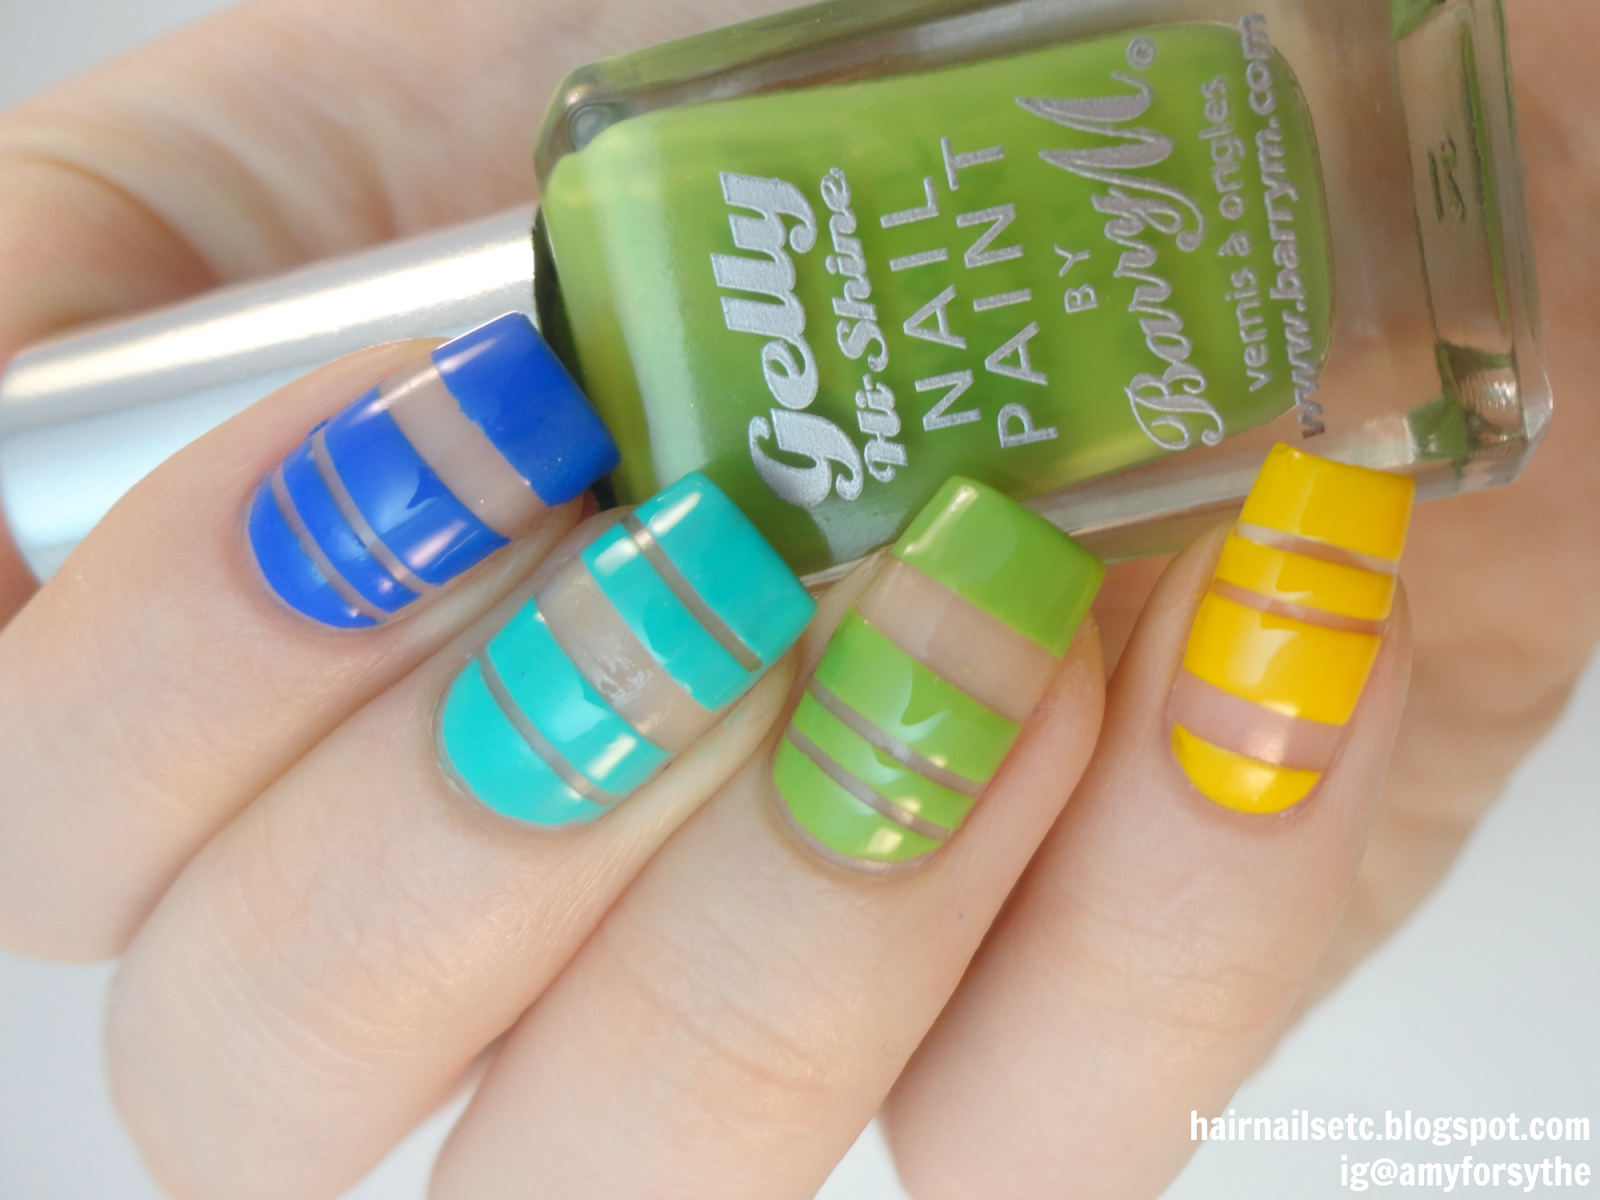 Bright Spring Colours Negative Space Nail Art using Barry M Gelly Damson, Greenberry and Key Lime and Kiko Yellow - www.hairnailsetc.blogspot.co.uk / ig@amyforsythe